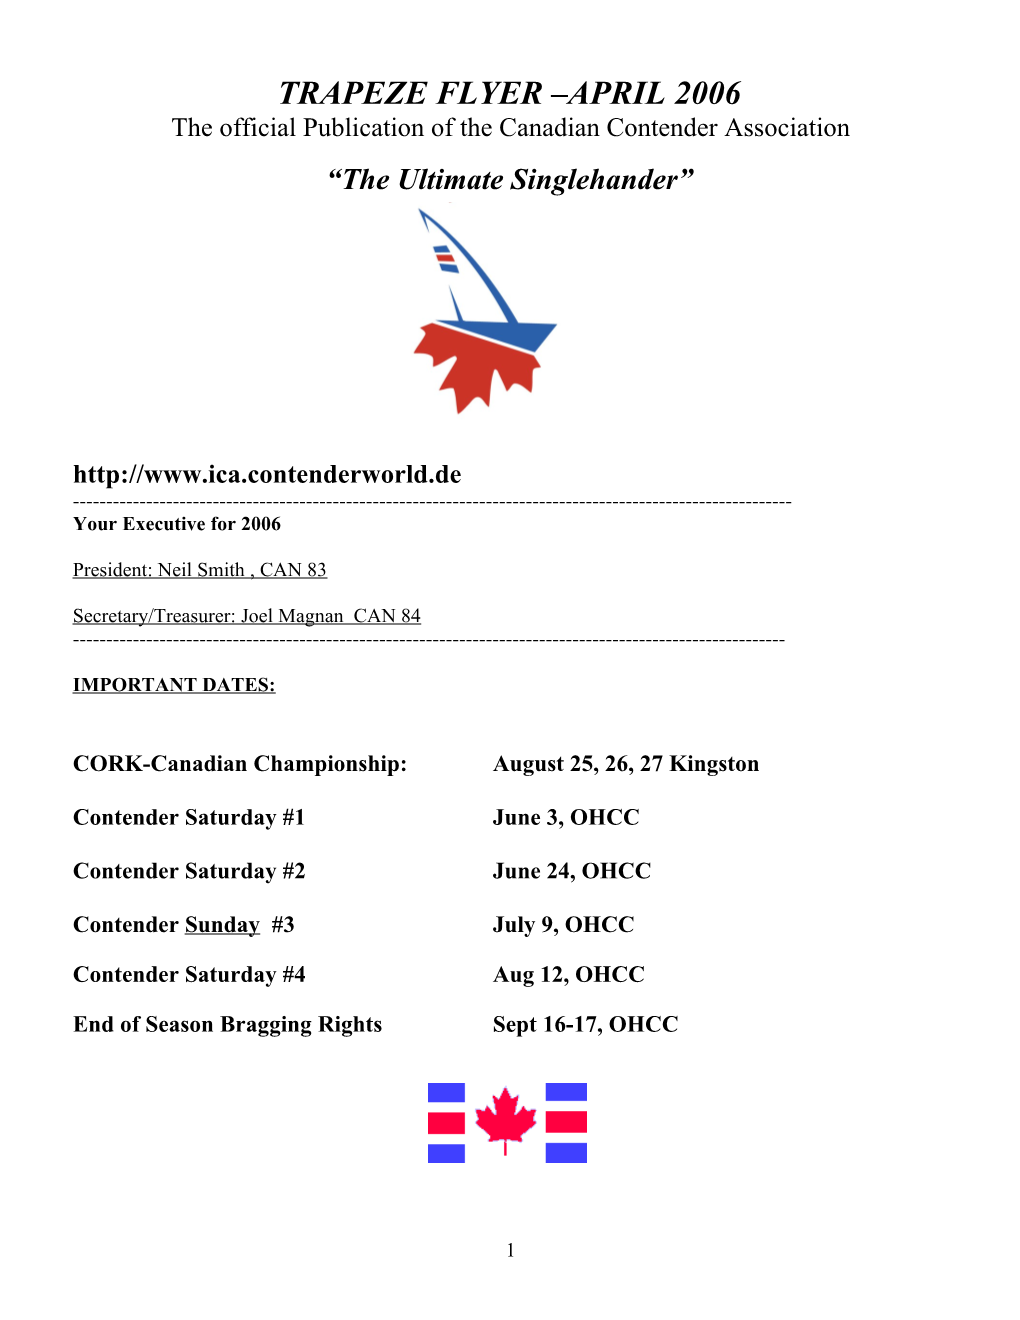 The Official Publication of the Canadian Contender Association